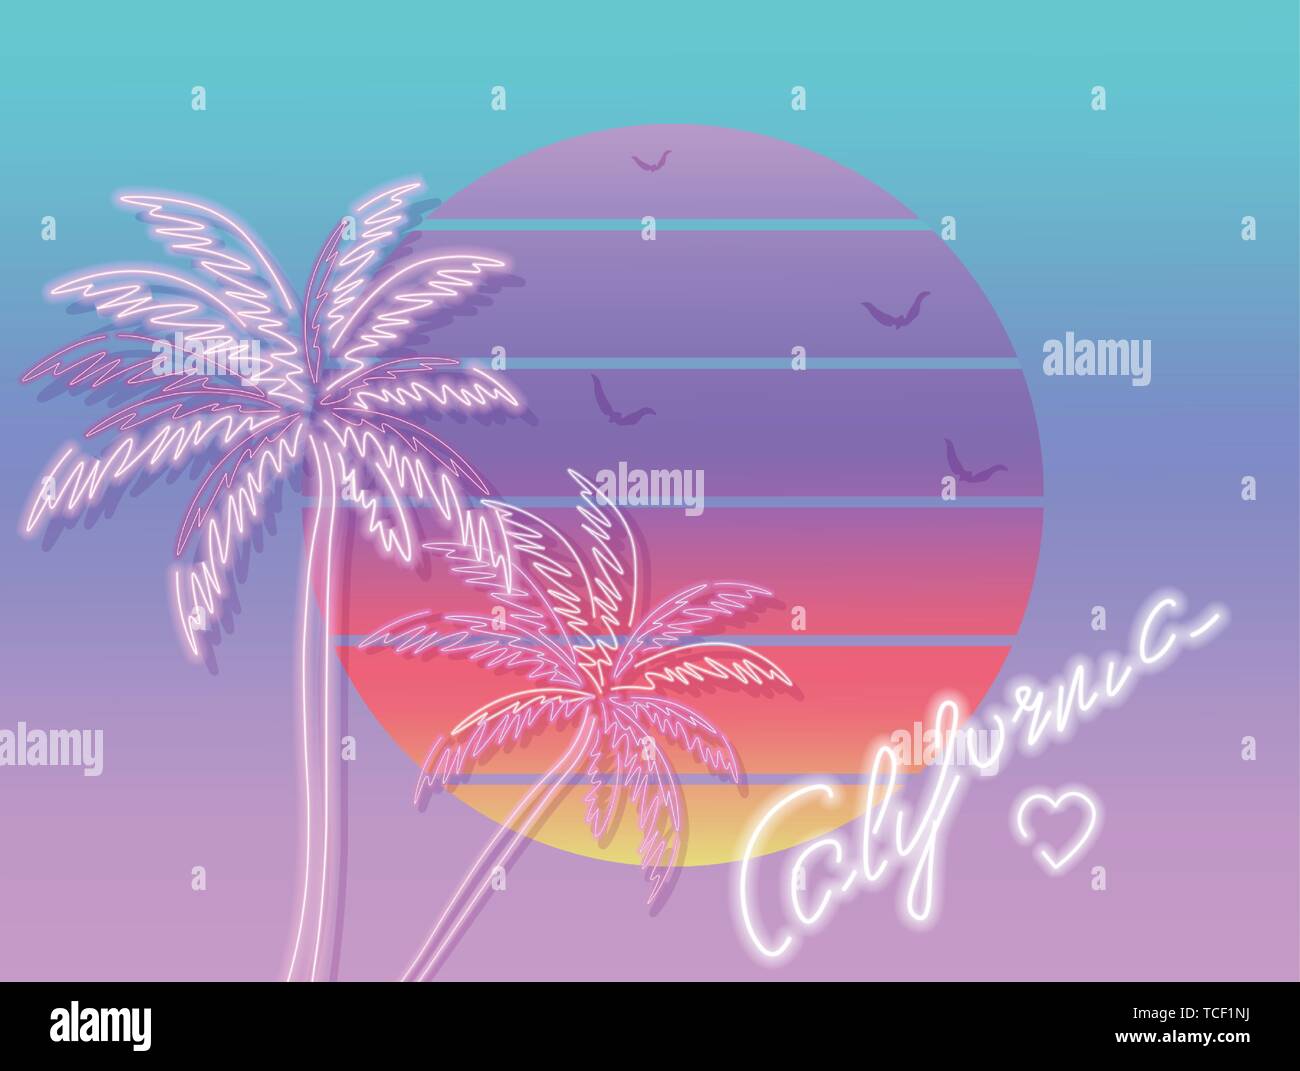 Tropic sunset california poster Vector. Colorful vintage decor symbol Stock Vector